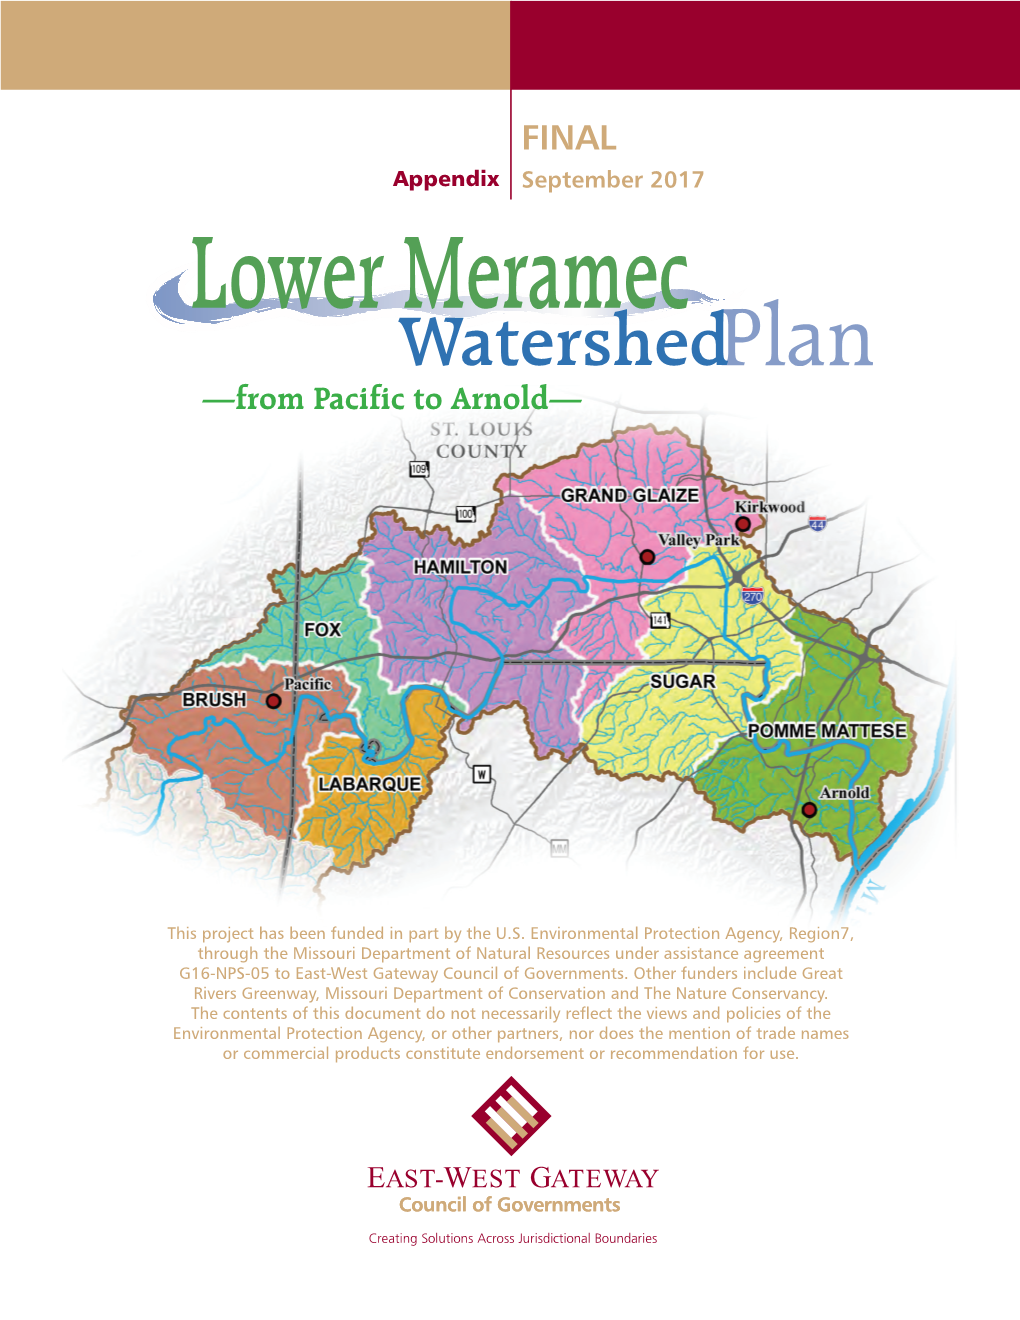 Lower Meramec Watershed Planning Area Are Considered Degraded in Terms of Their Ability to Host a Full Complement of Fish Species